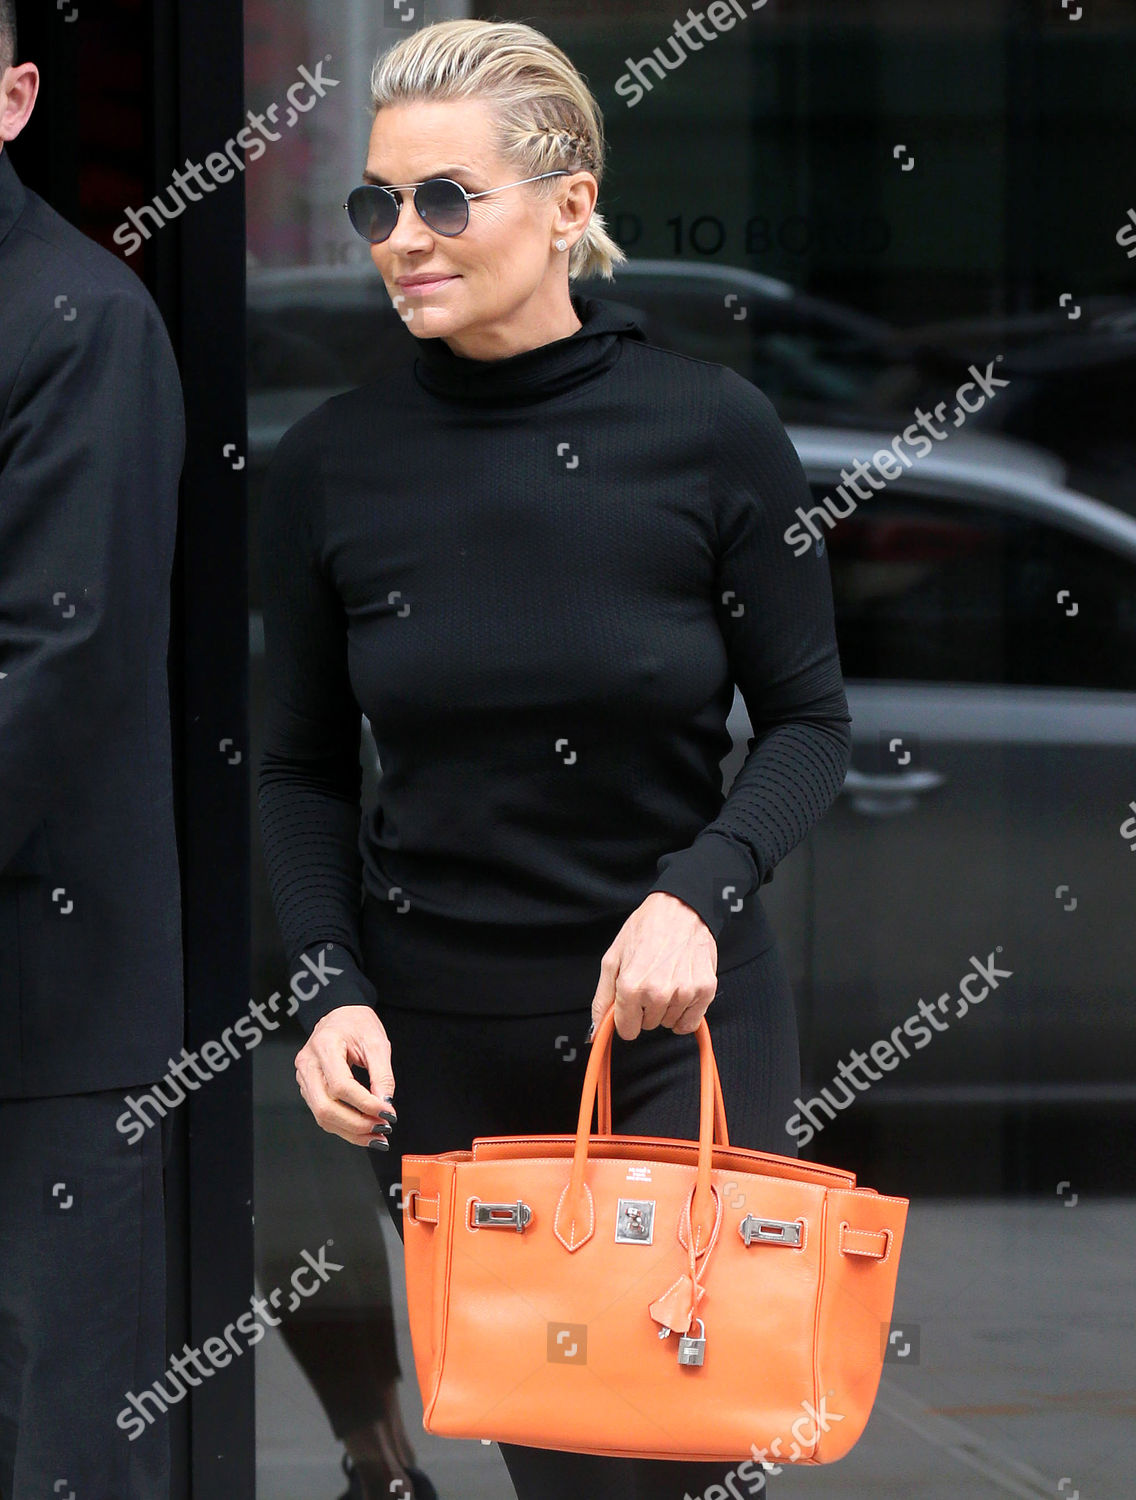 Image detail for -For the Big Day: The Most Expensive Hermes Birkin Bag